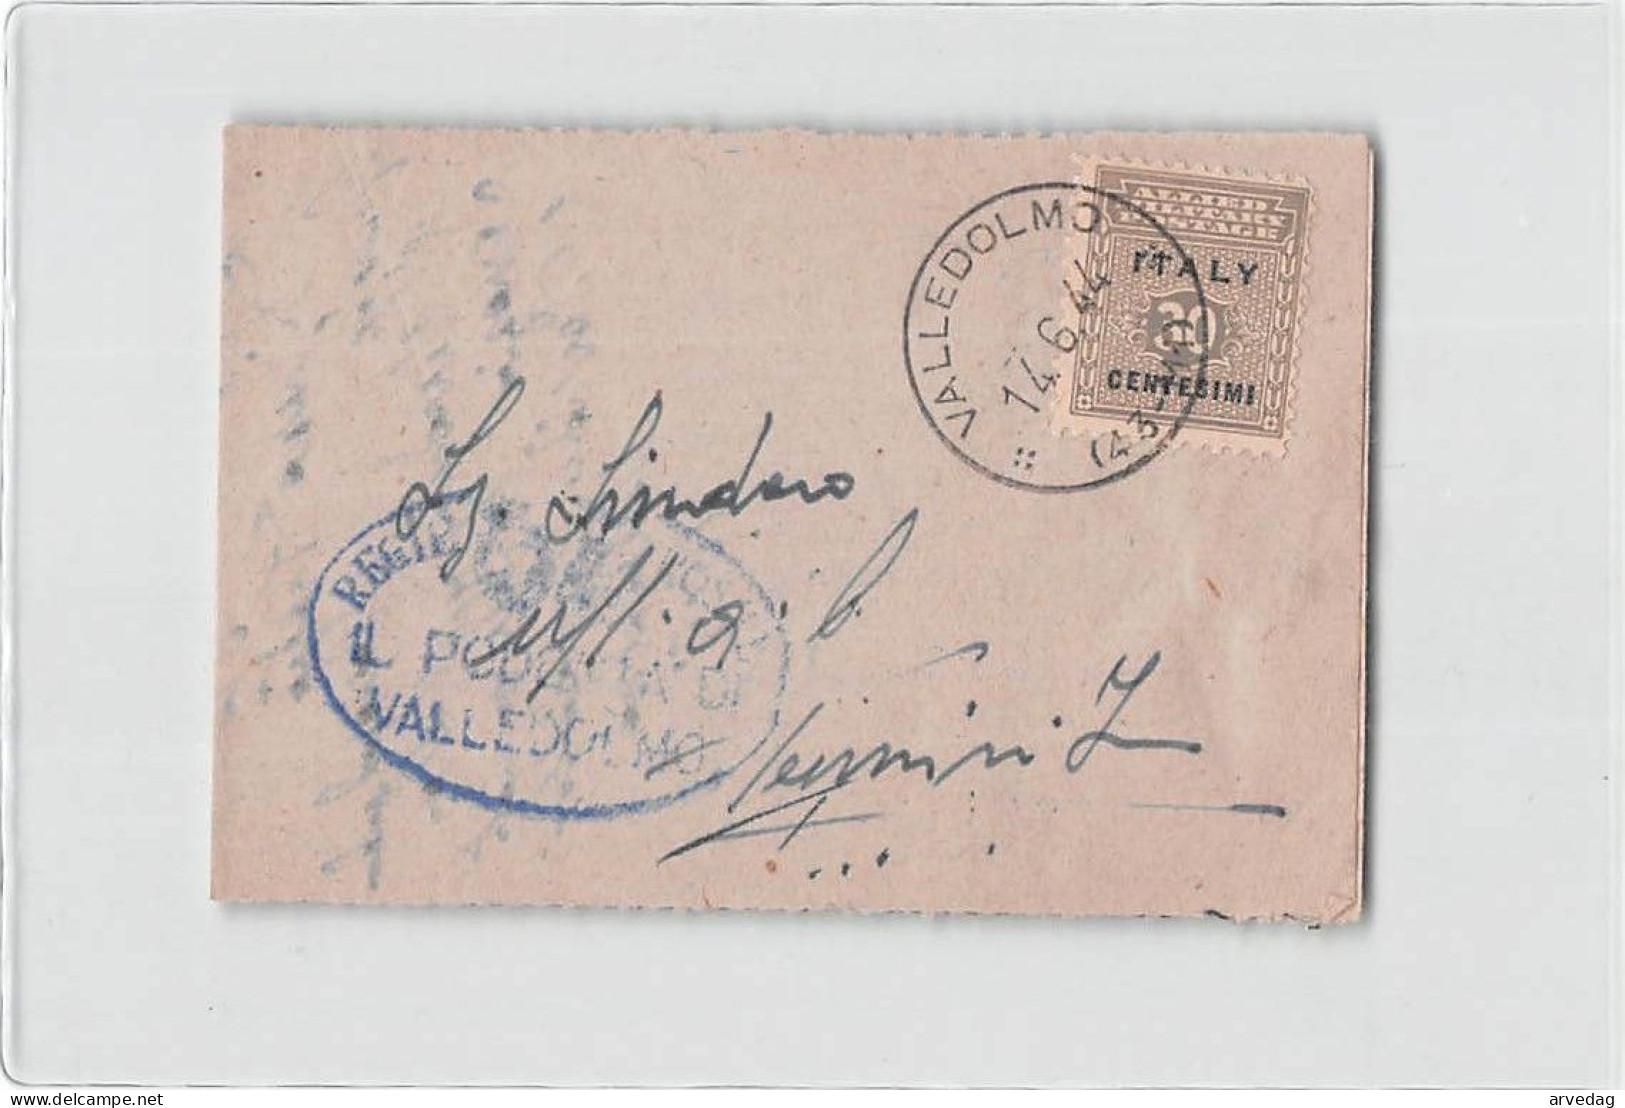 16025 VALLEDOLMO X TERMINI IMERESE - ALLIED MILITARY POSTAGE ITALY 30 CENTESIMI - Anglo-american Occ.: Sicily